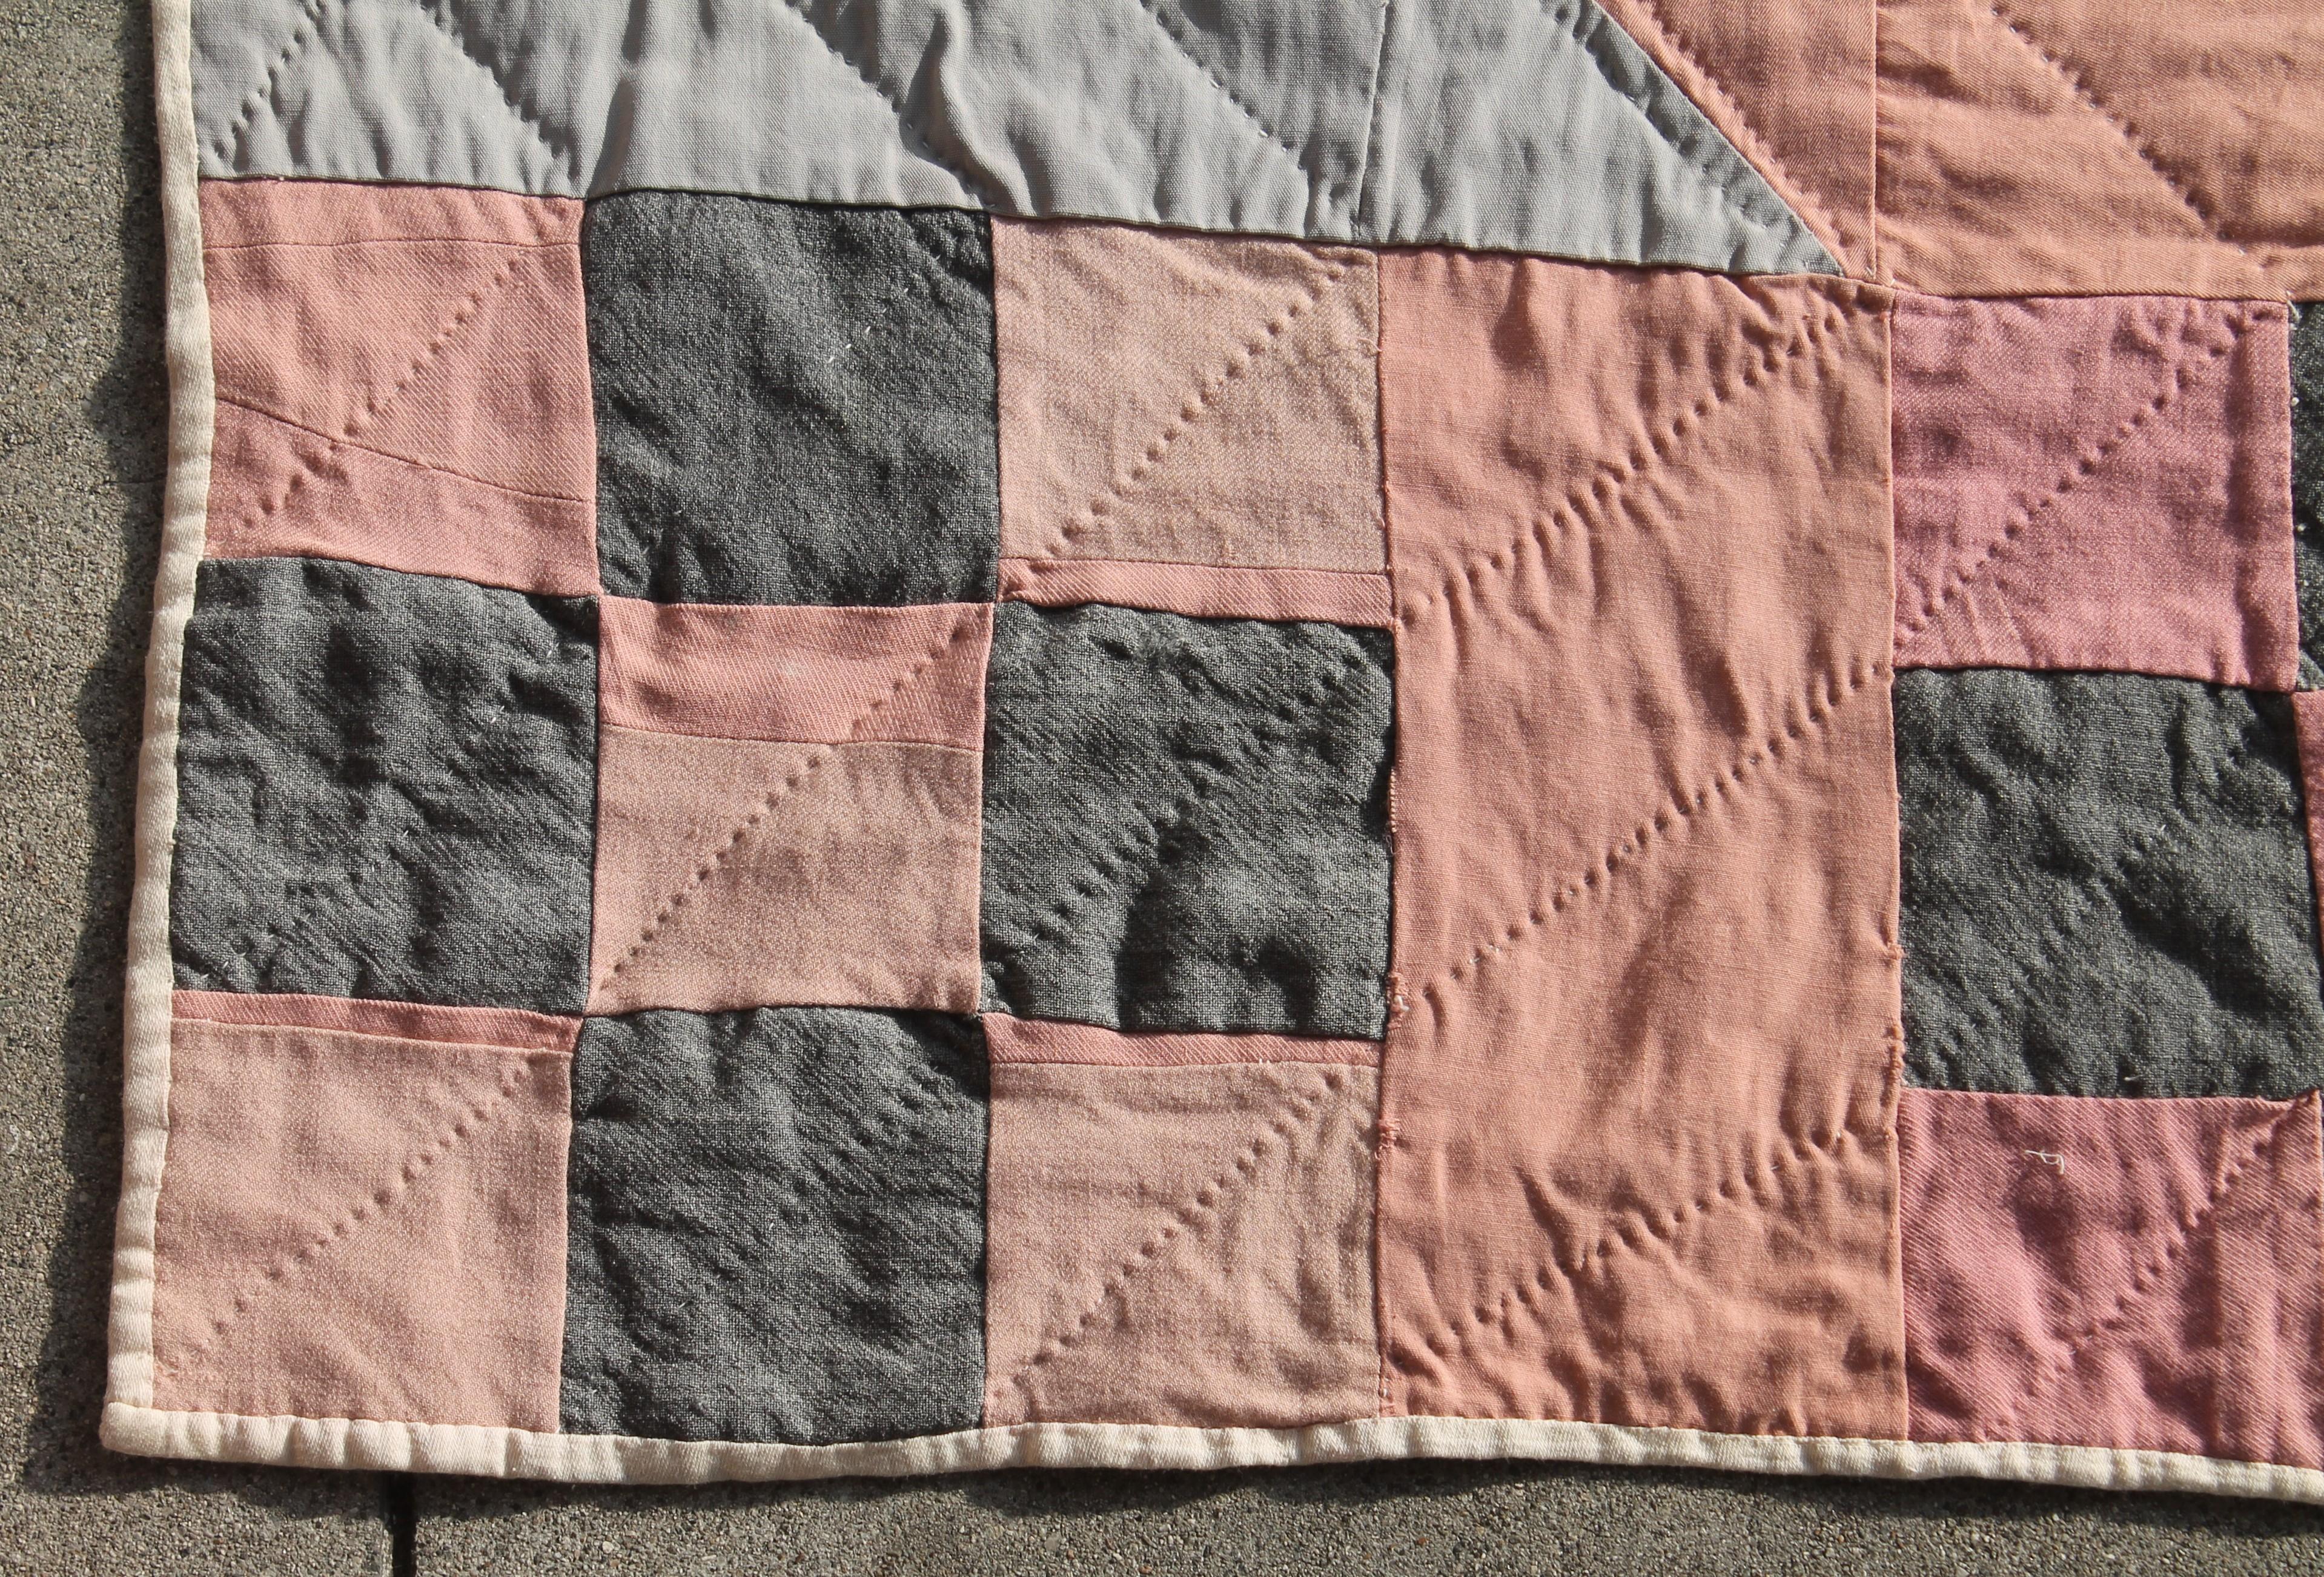 This cool colors wool nine patch quilt is in very somber colors and good condition. It was made in Mifflin County, Pennsylvania. The soft grey and salmon colors work very nicely together.